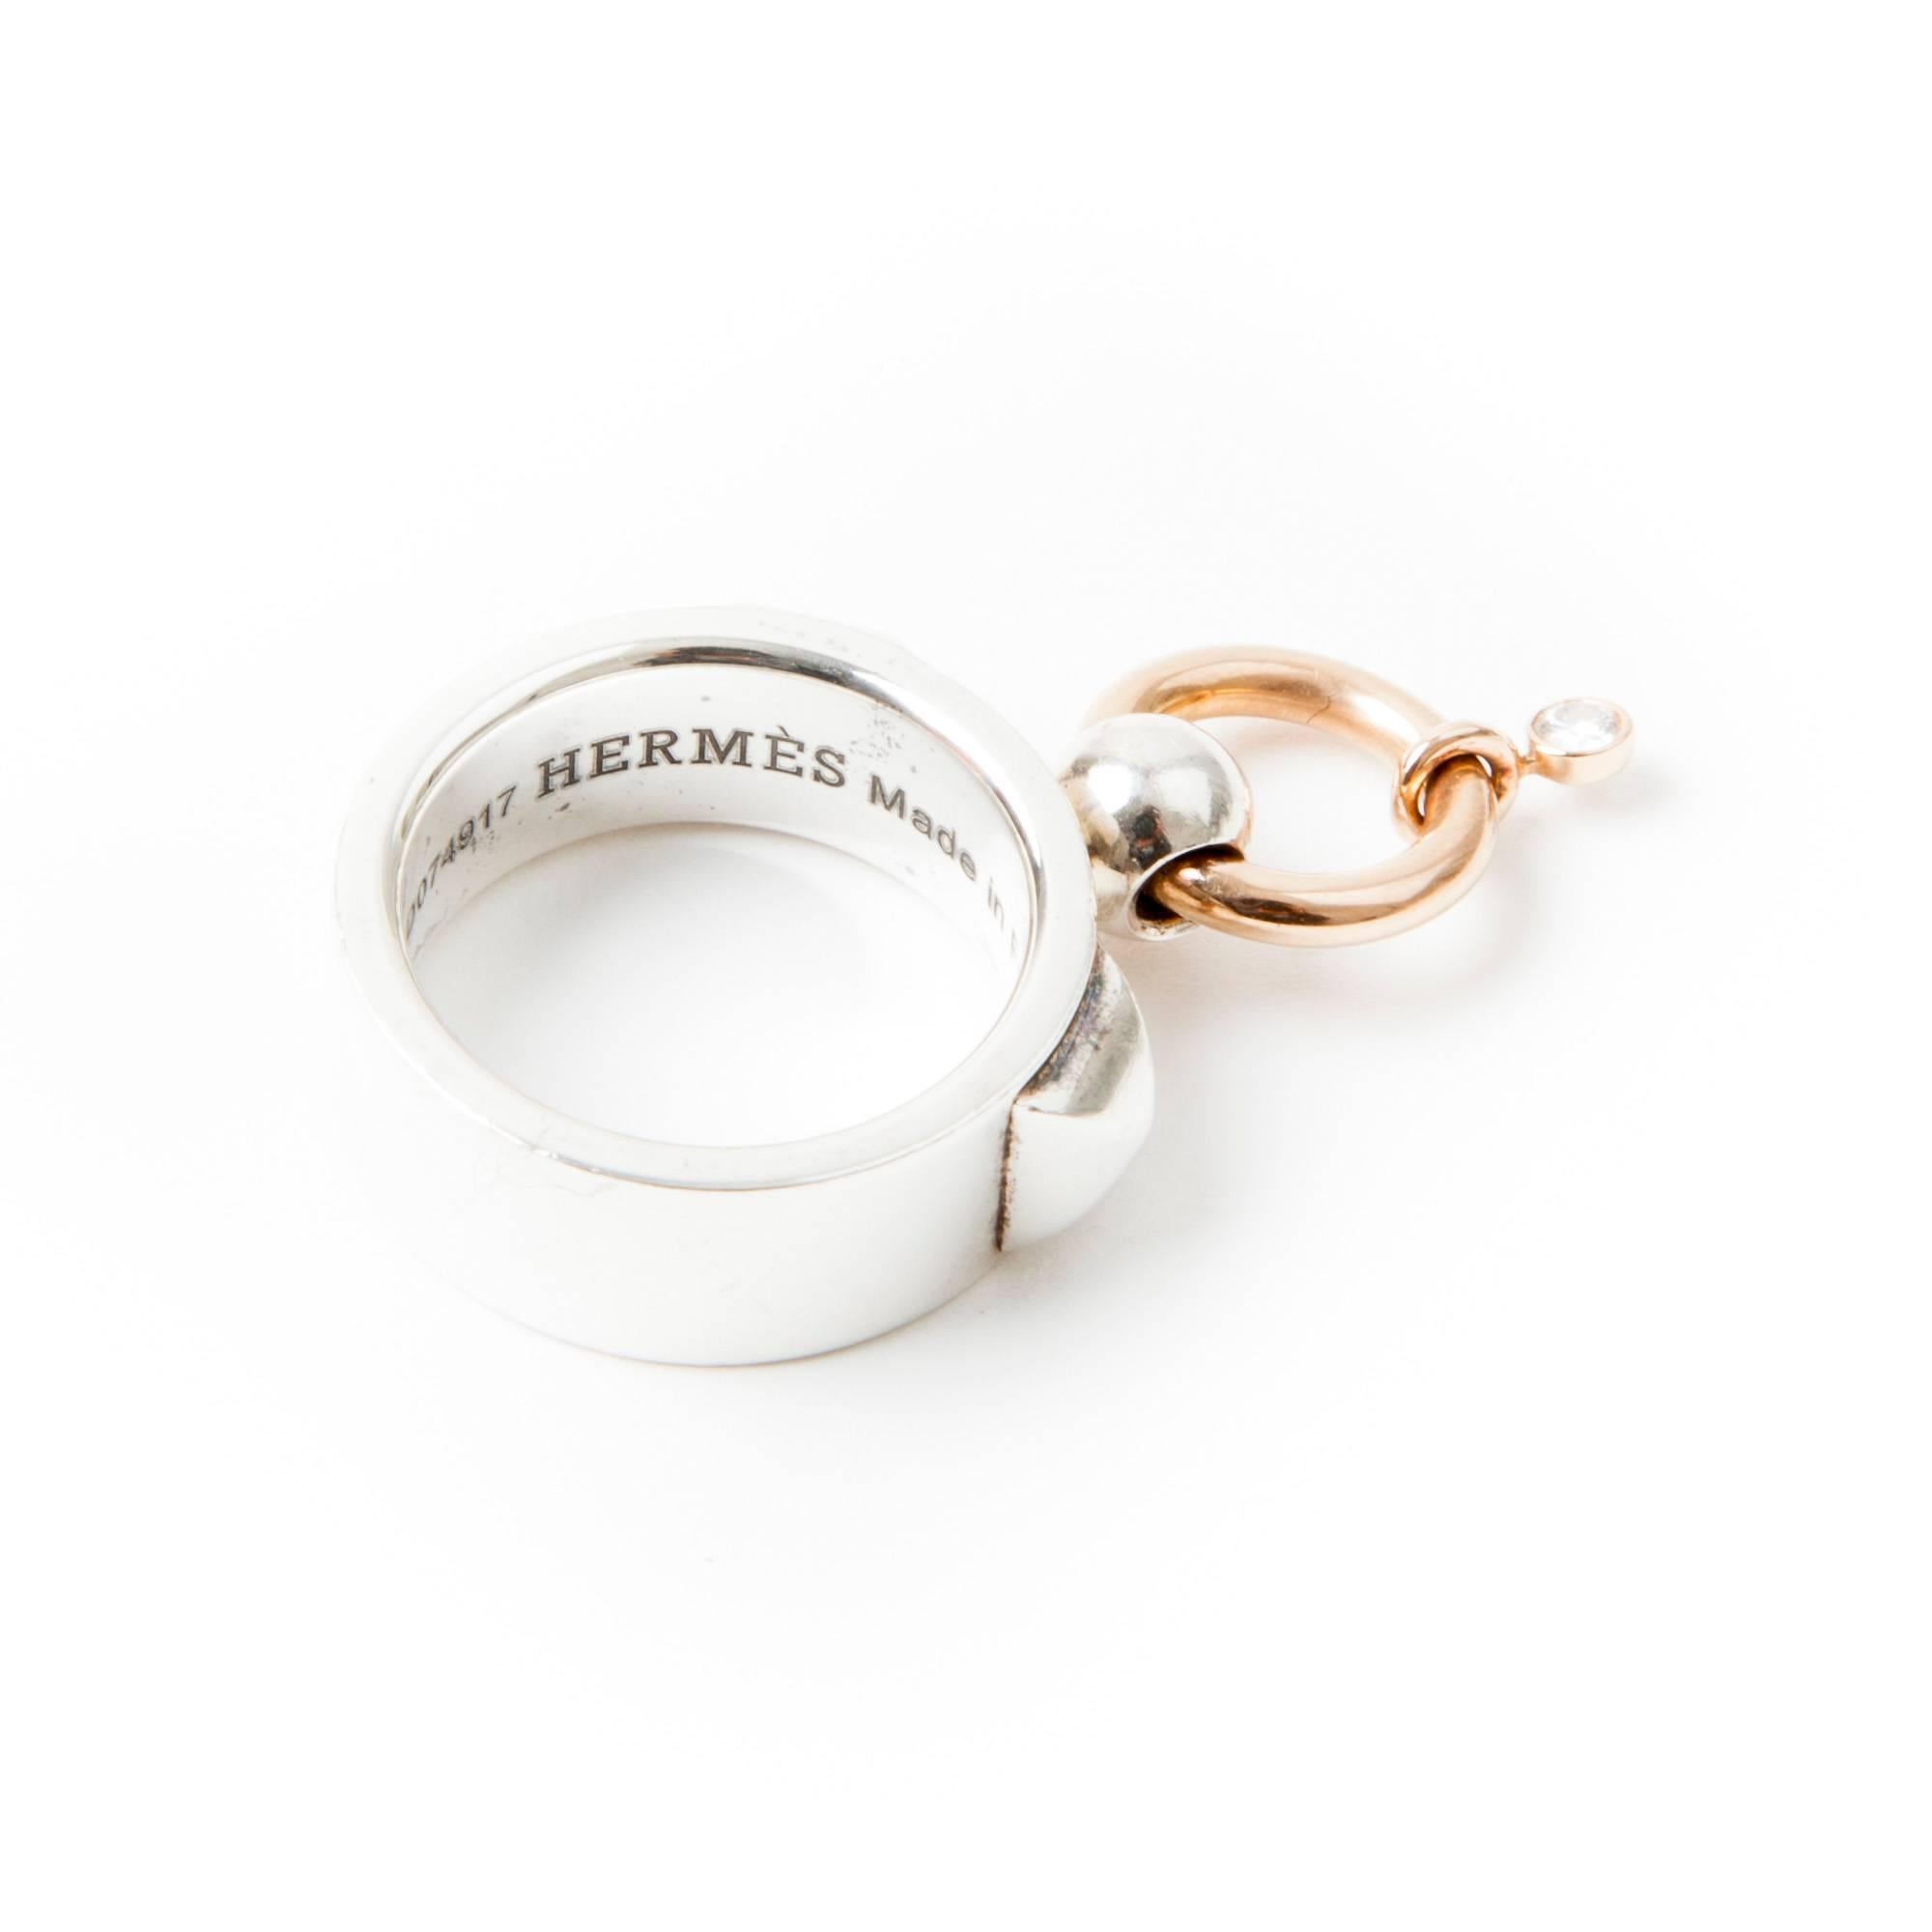 Beautiful Hermès ring, Collier de Chien, in 925 sterling silver, 750 gold and diamond. Size 54.

Made in France. Numbered ring. 

Dimensions: width of the ring: 0,8 cm, inside diameter: 1,8 cm

Delivered in its Hermes box